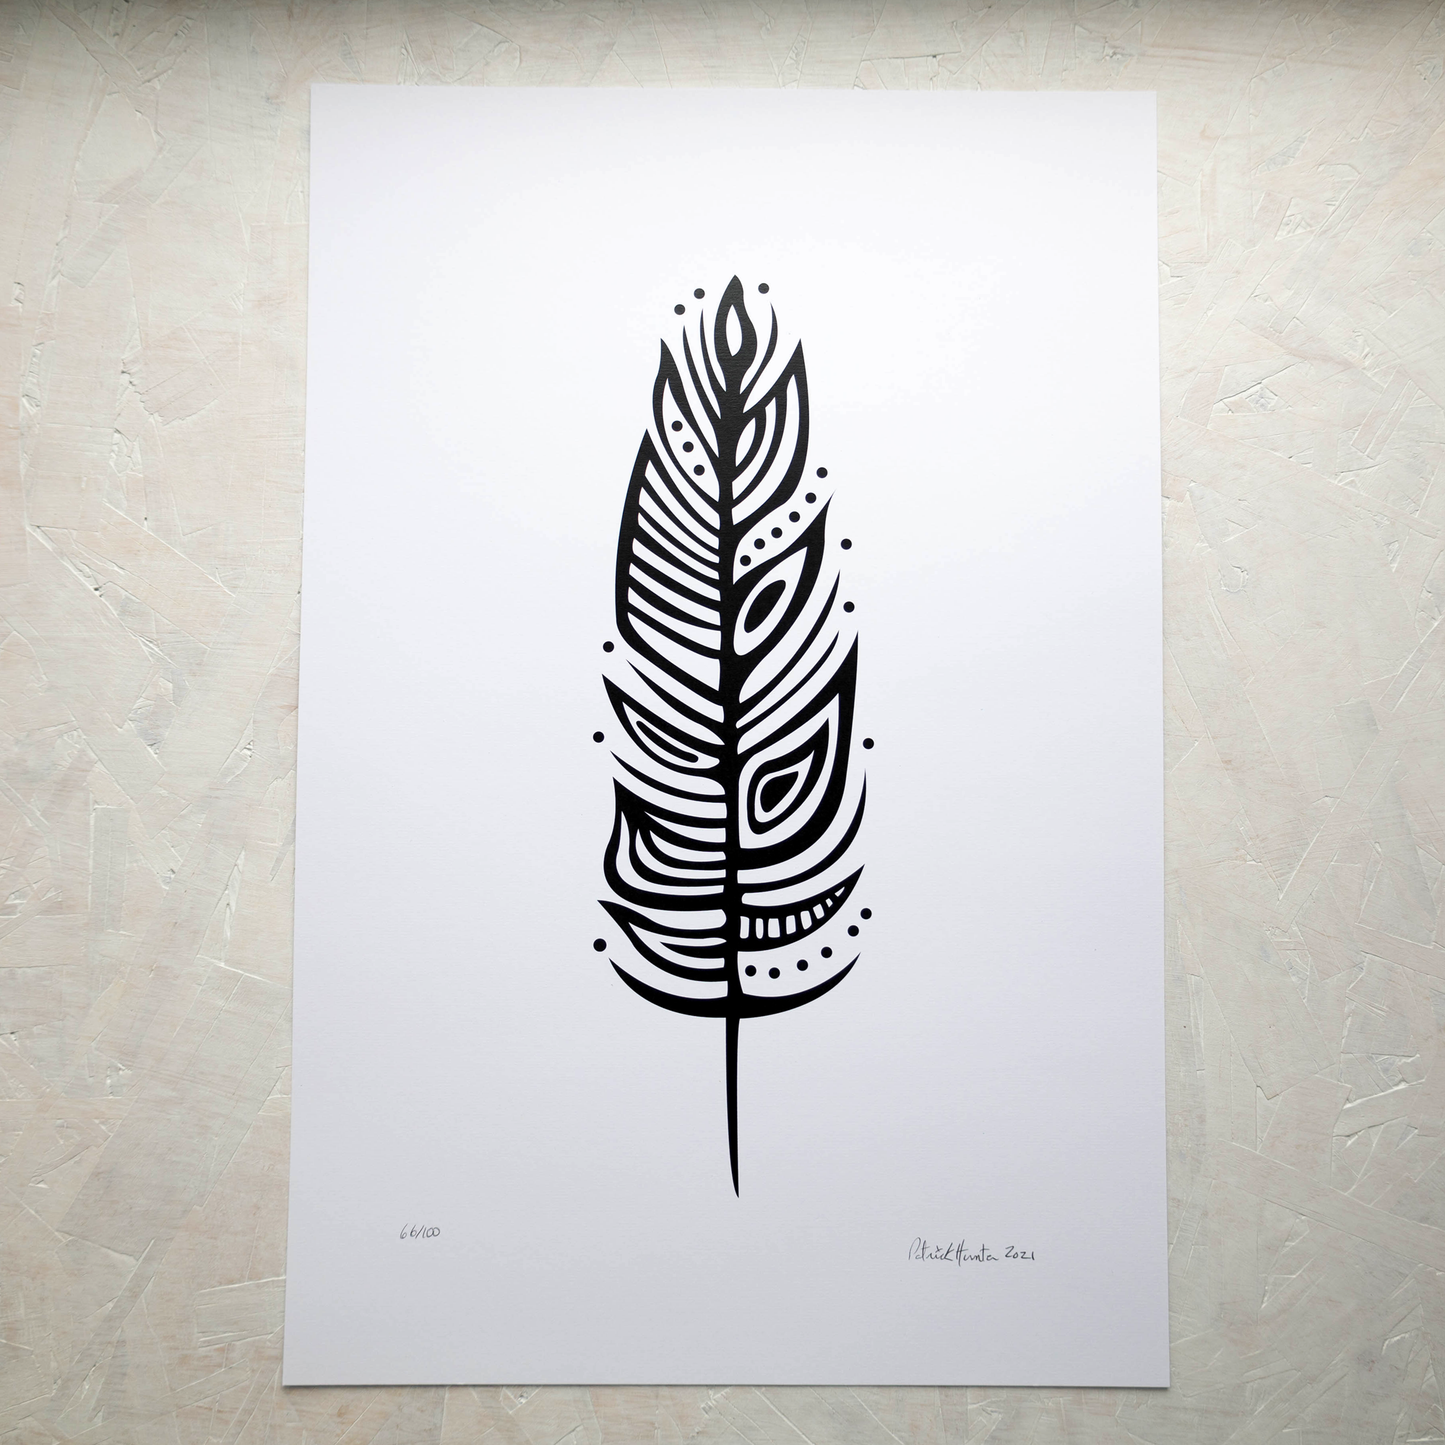 Print of Patrick Hunter's painting of an eagle feather in black on white, woodland art style.